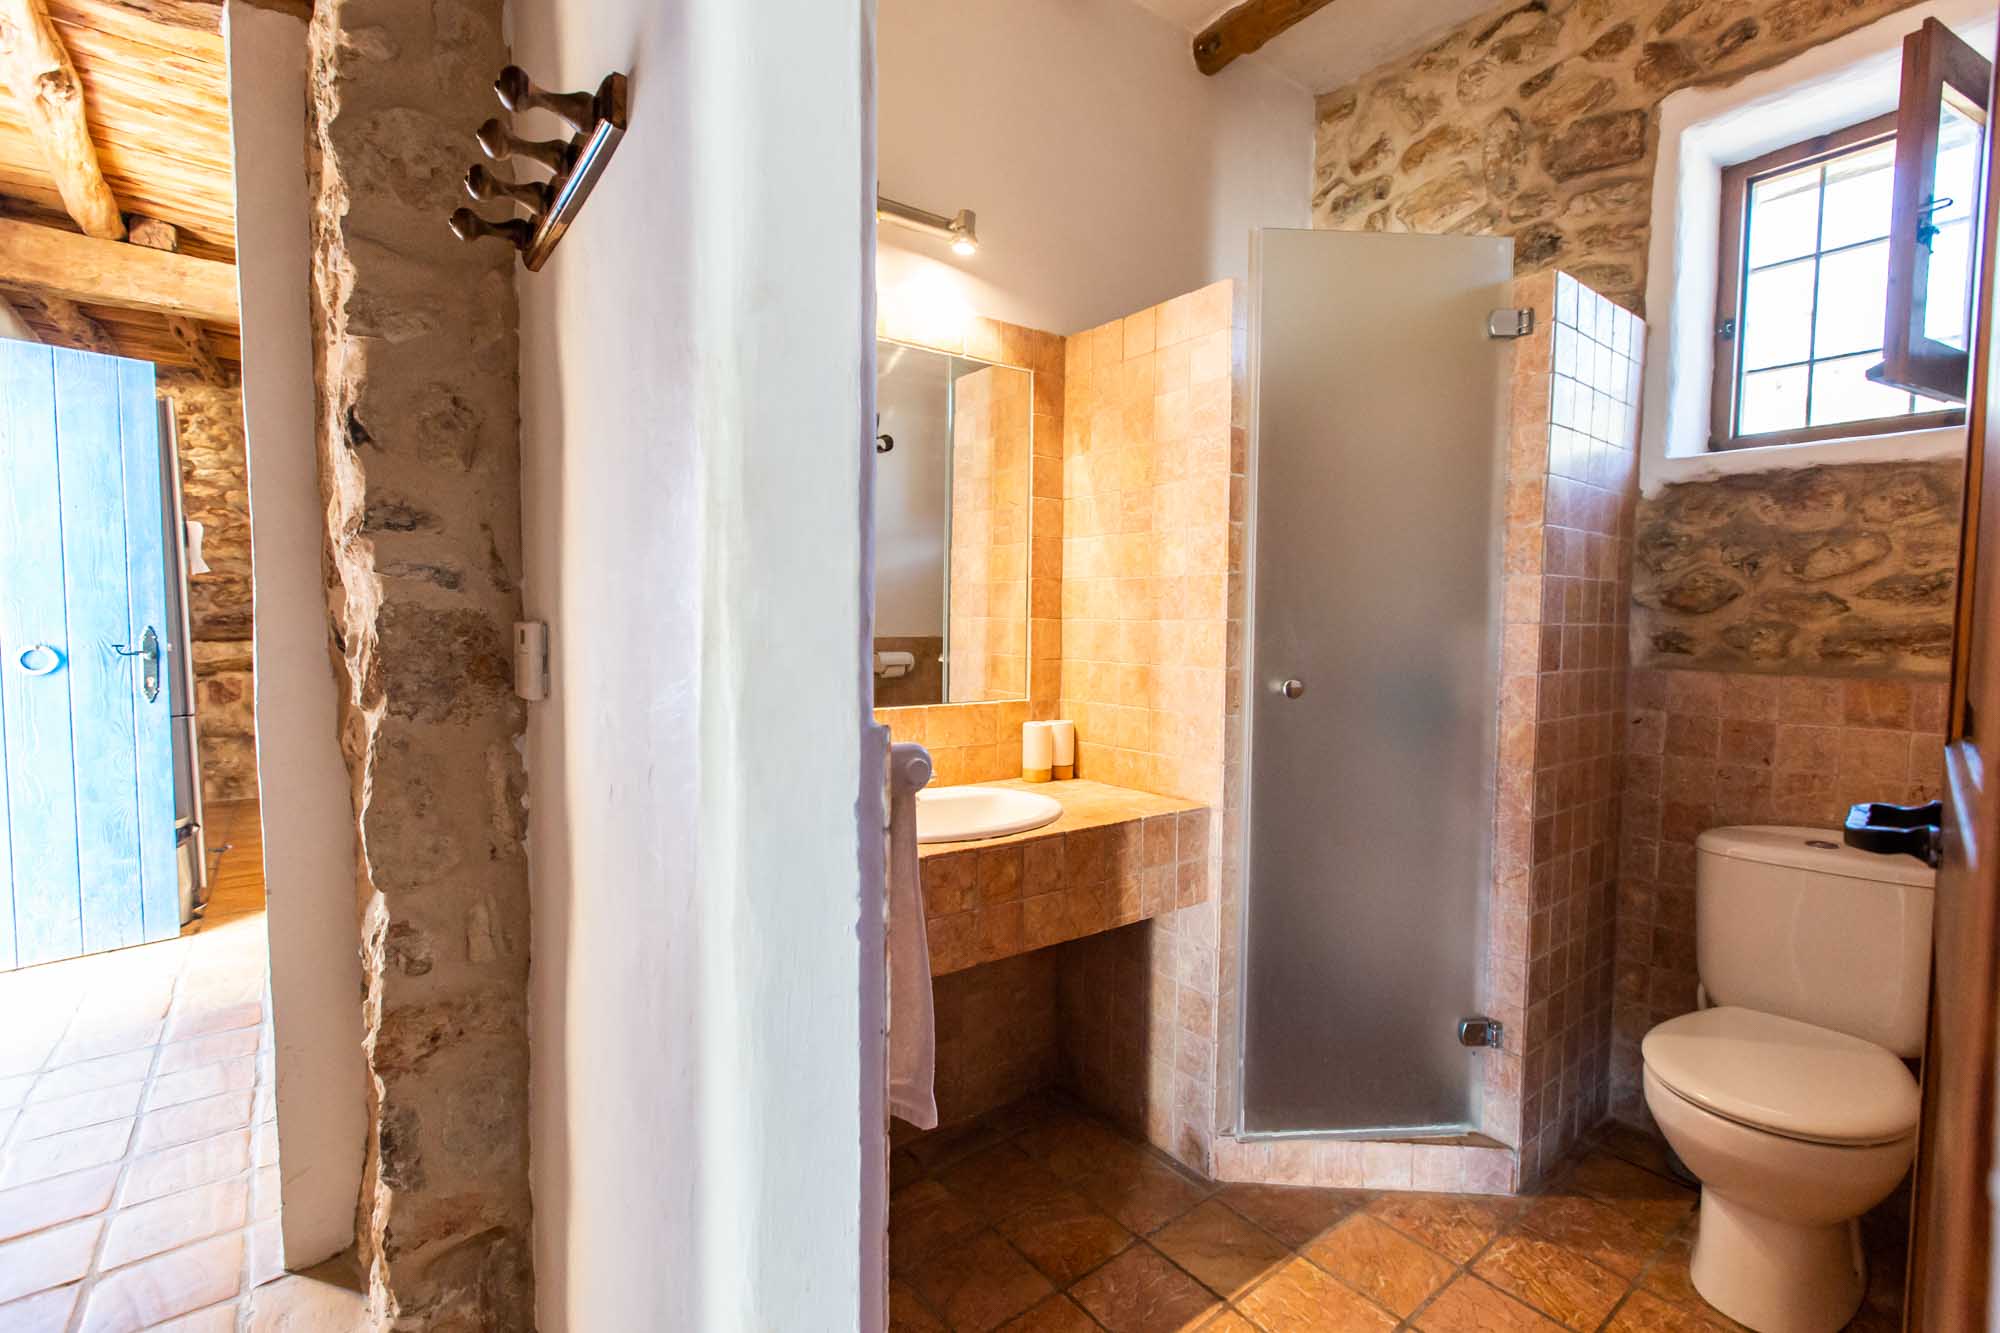 Beautiful traditional rustic Finca on a large property